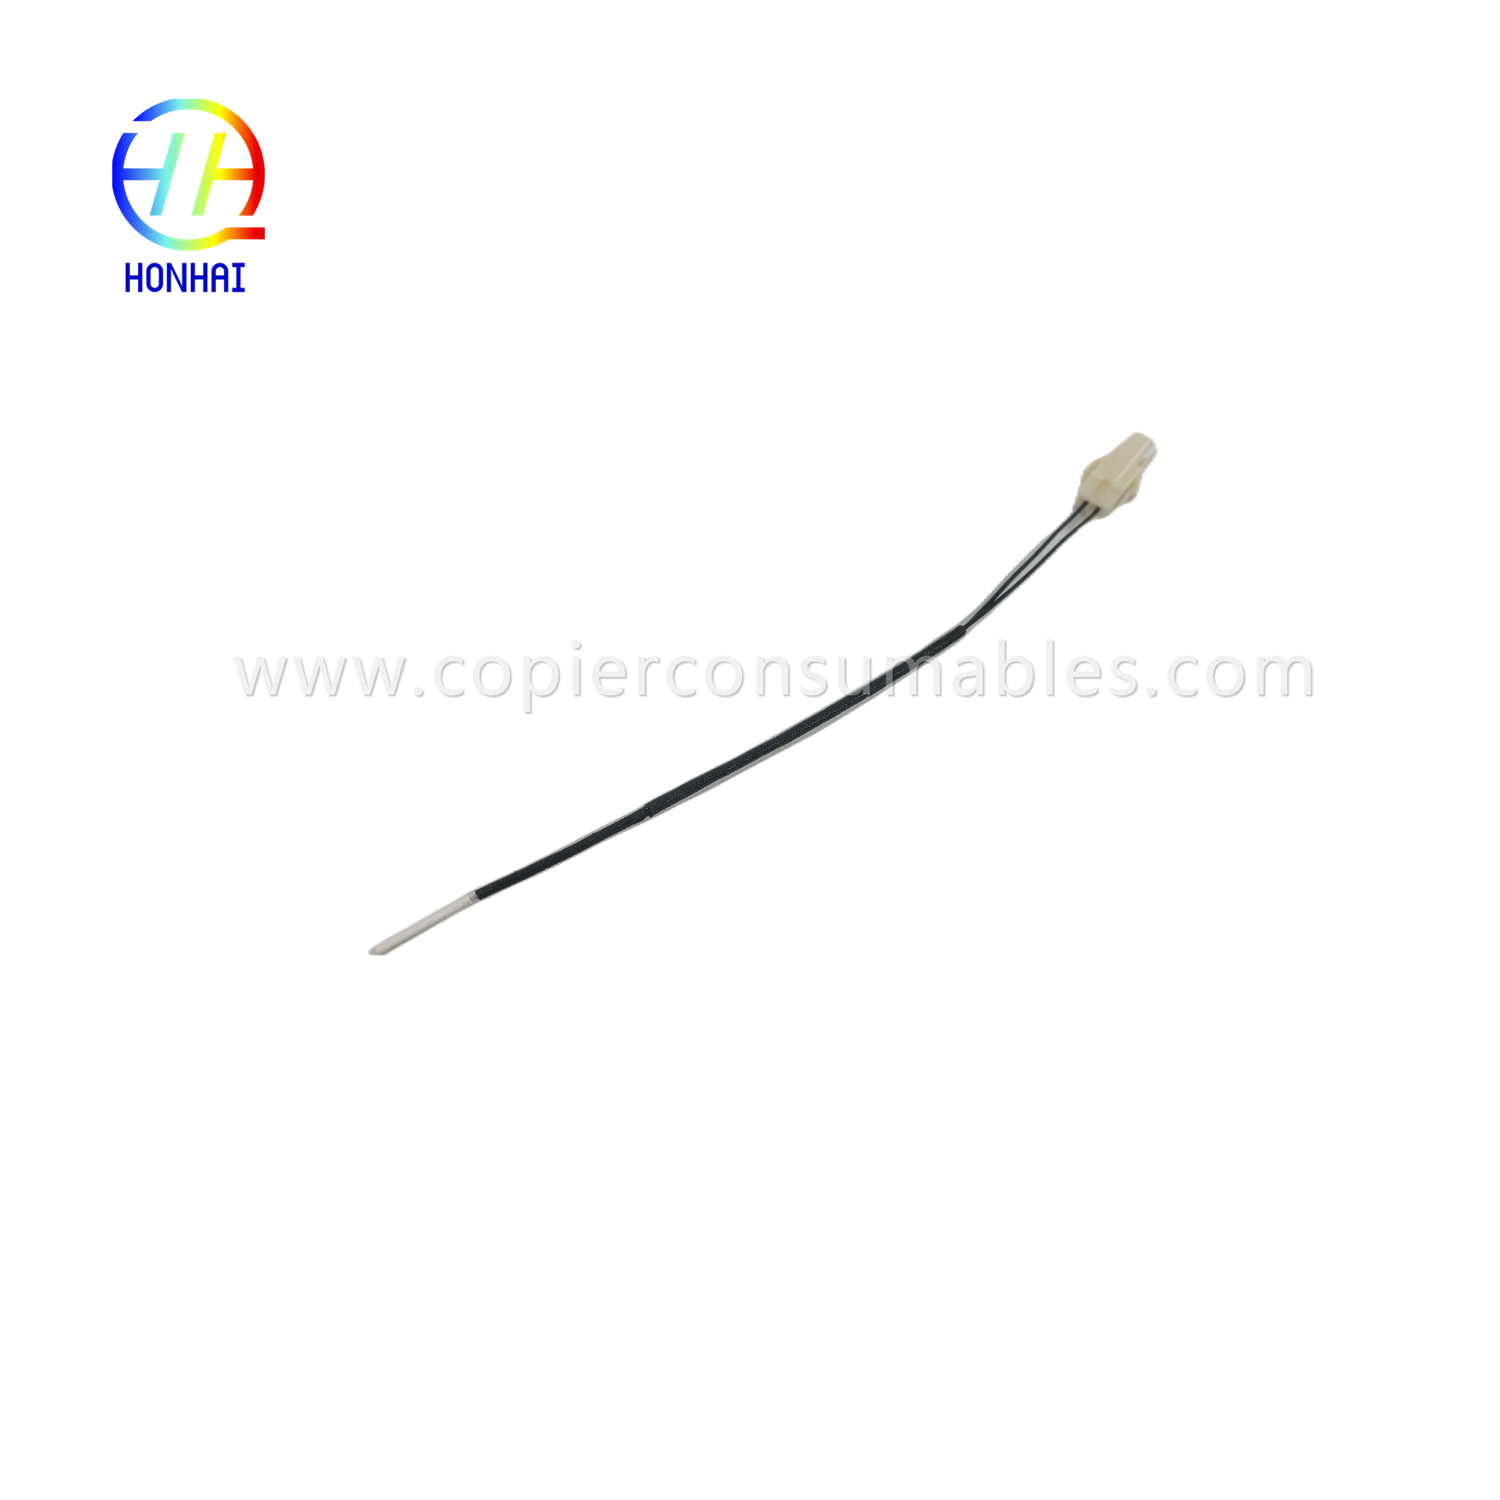 Fuser Thermistor mo OCE Pw300 340 350 360 365 TDS100 320 400 450 500 7050 9300 9400